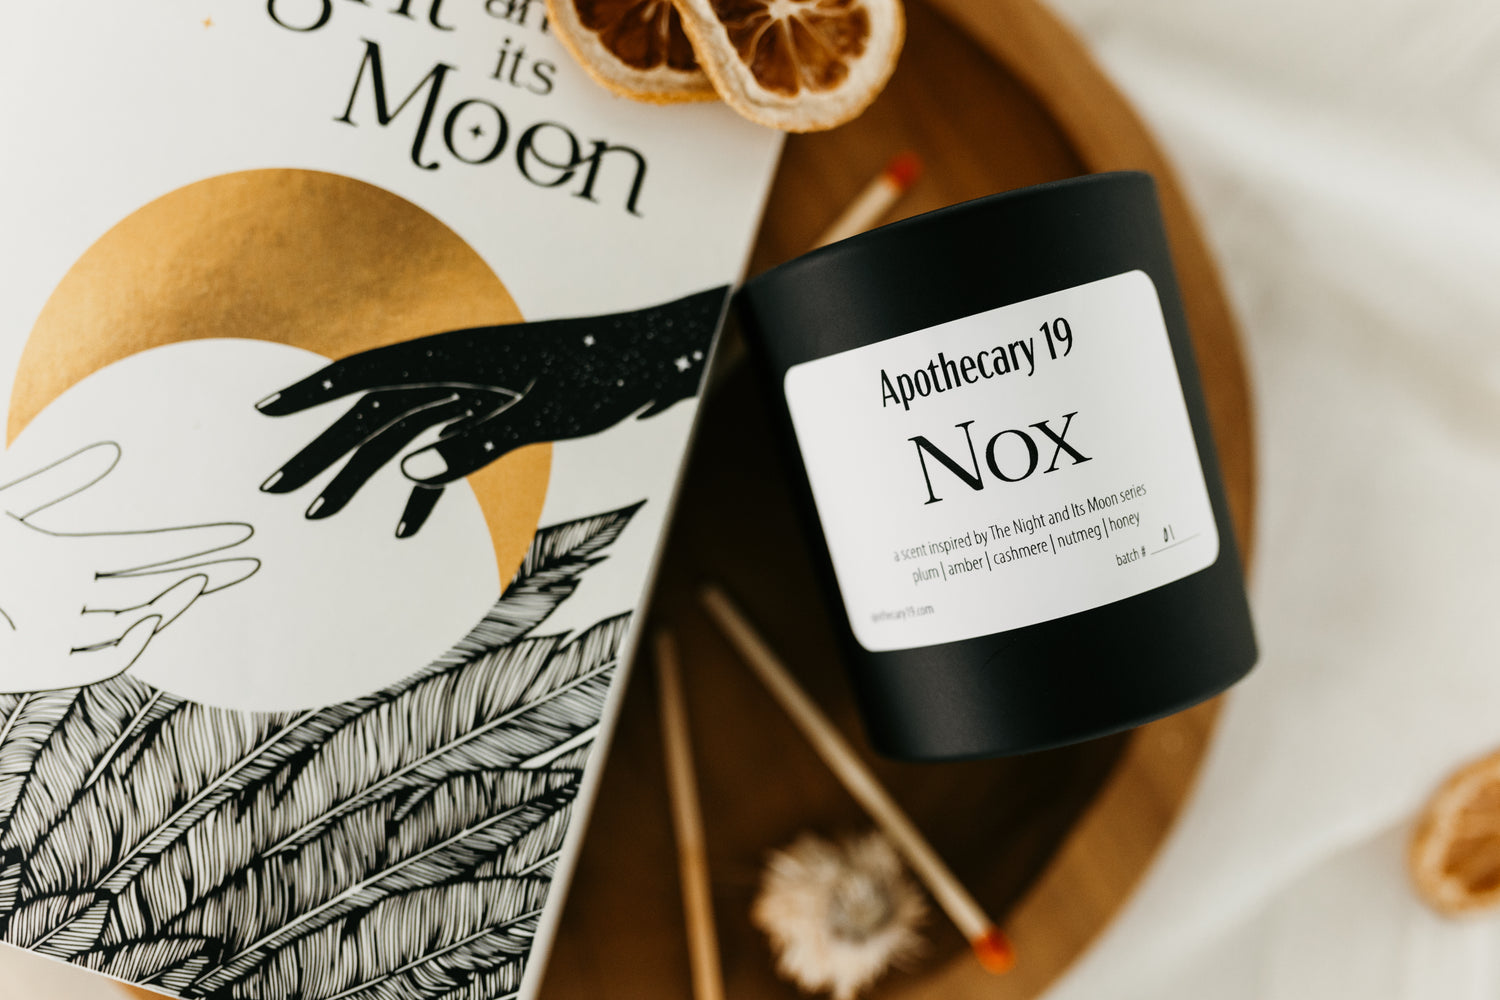 Nox — a scent inspired by The Night and Its Moon